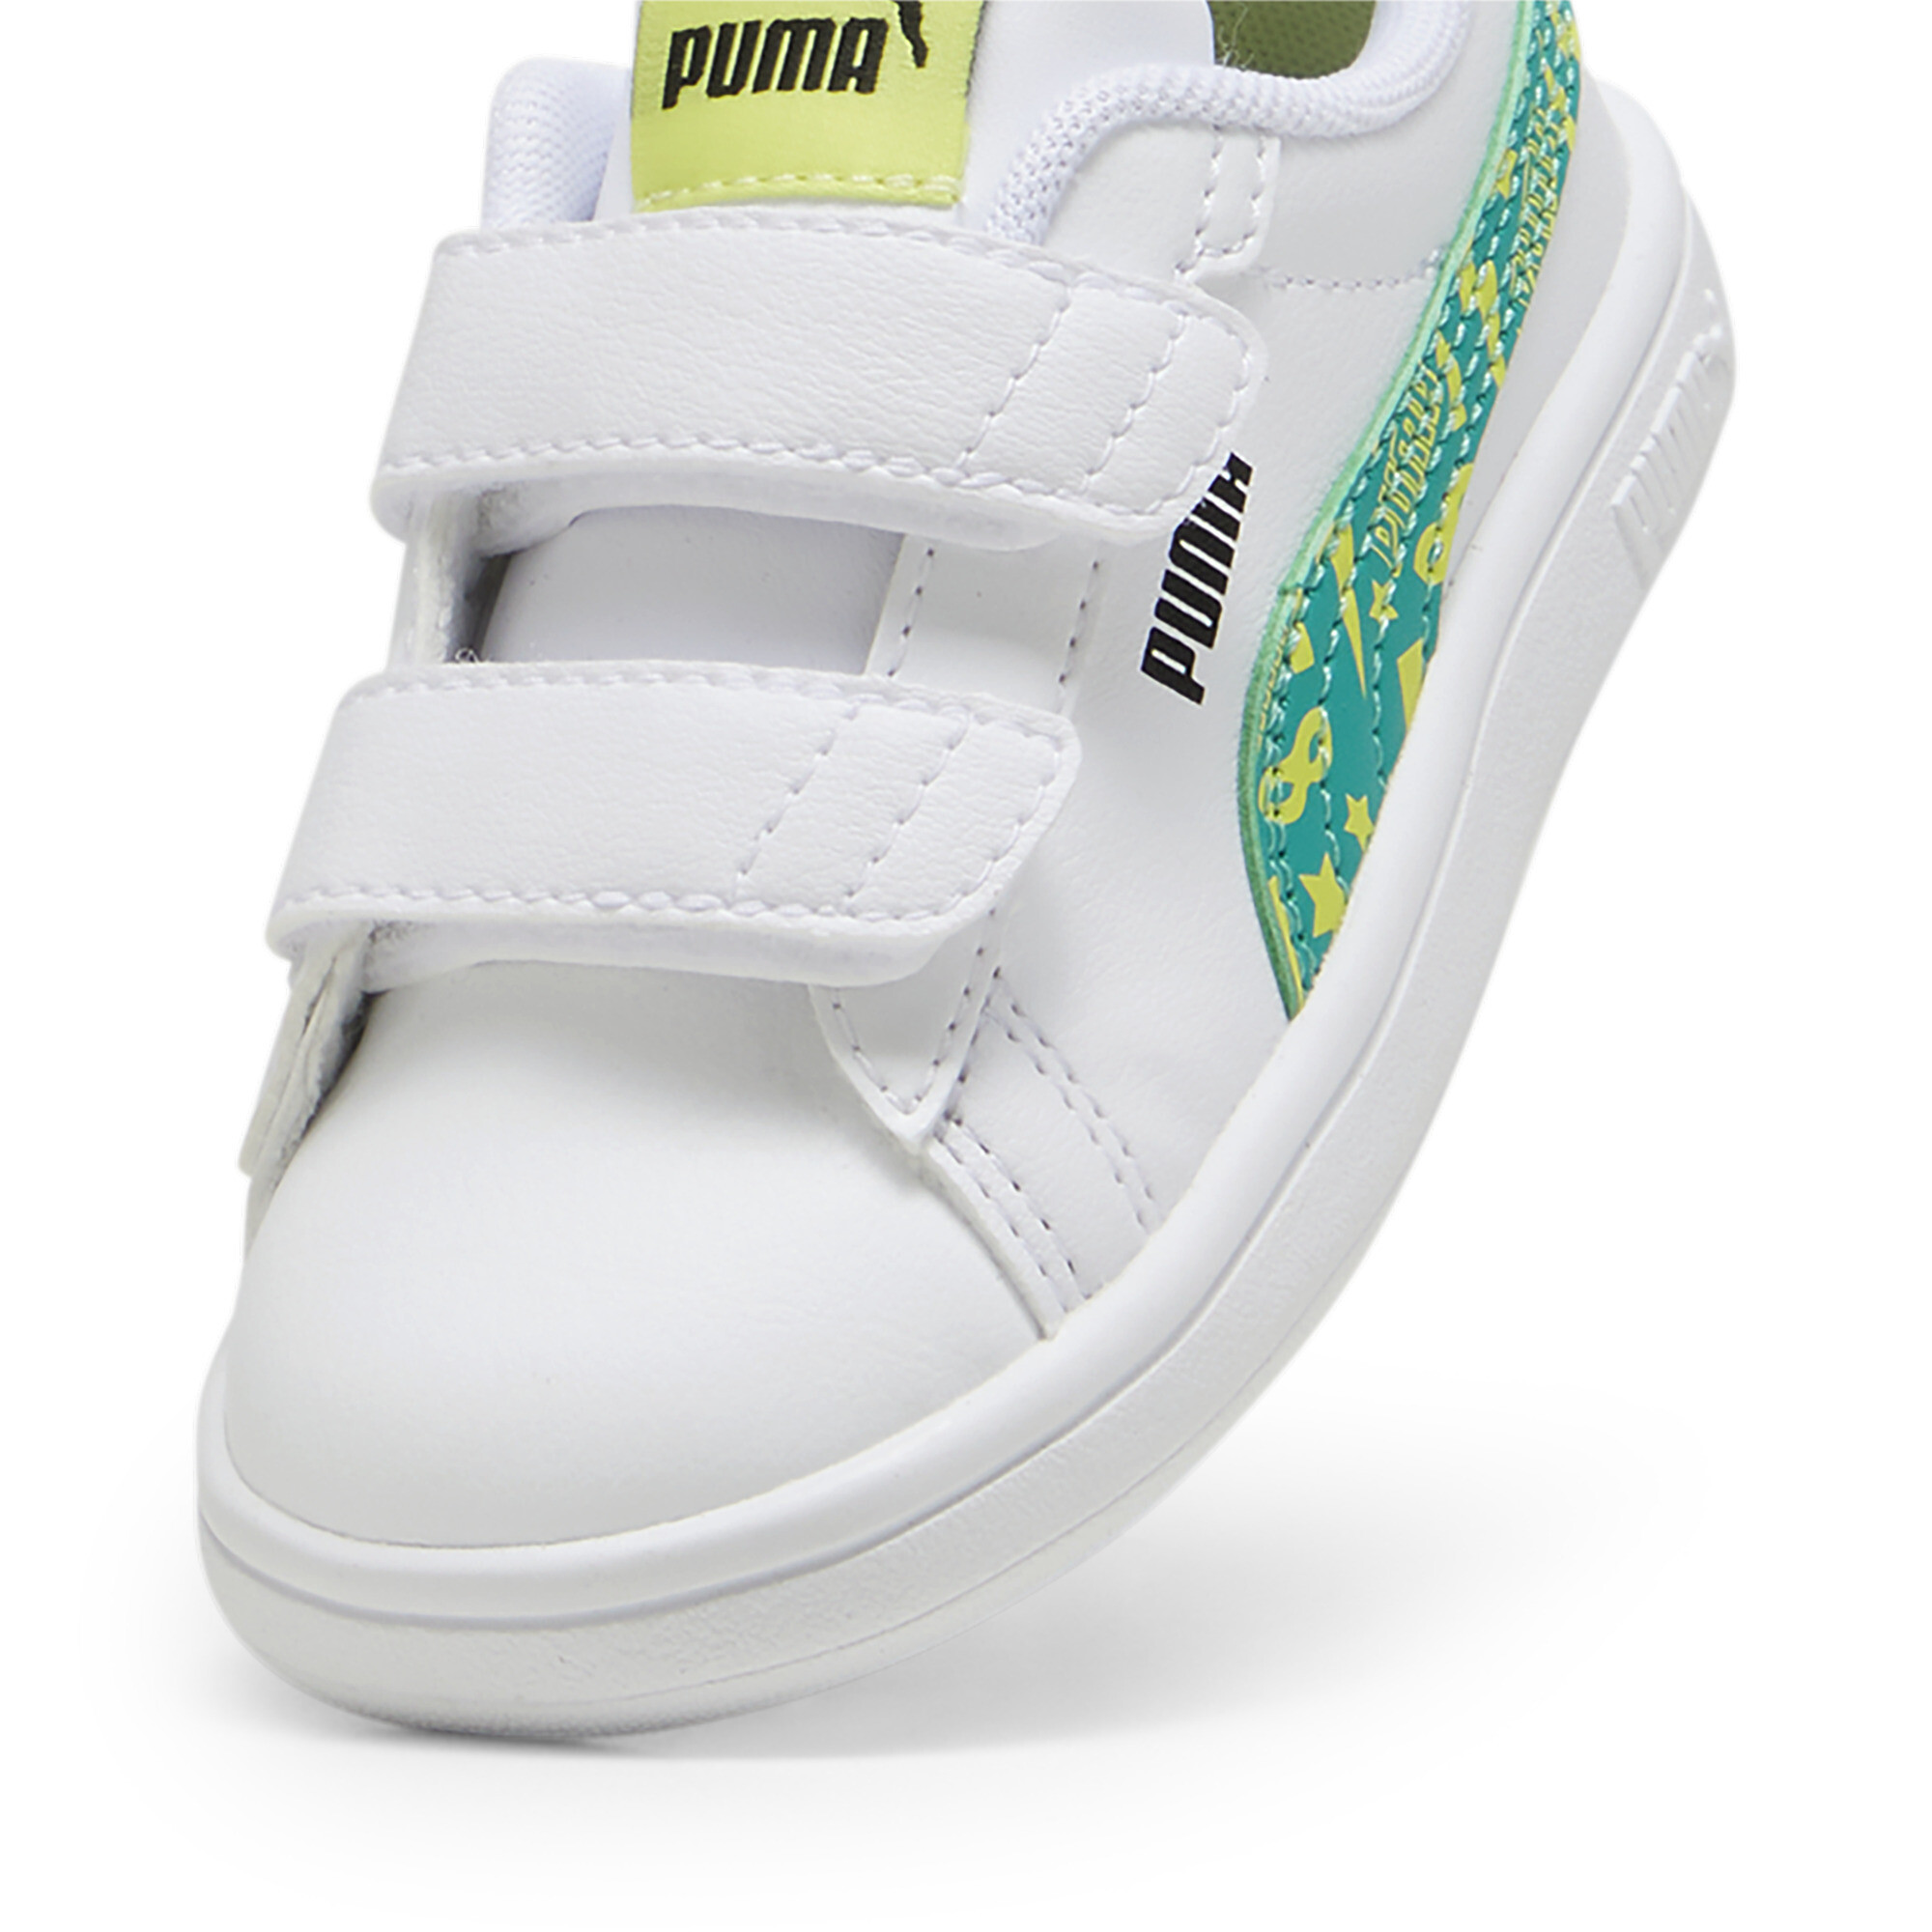 Puma Smash 3.0 Masked Hero Toddlers' Sneakers, White, Size 20, Shoes